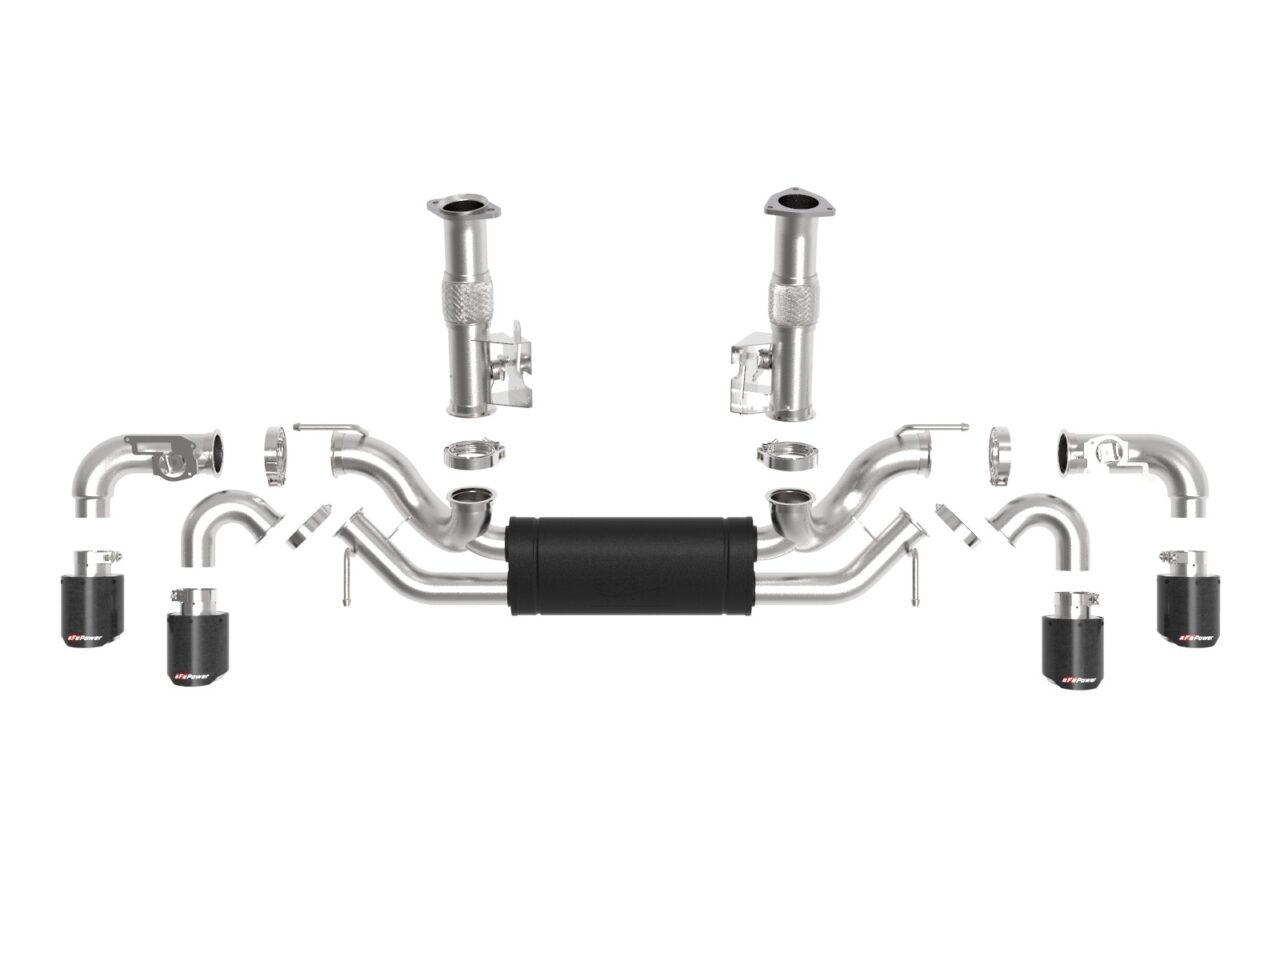 Exploded view with all parts of aFe POWER stainless steel exhaust system for 20-22 C8 Exhaust on white background